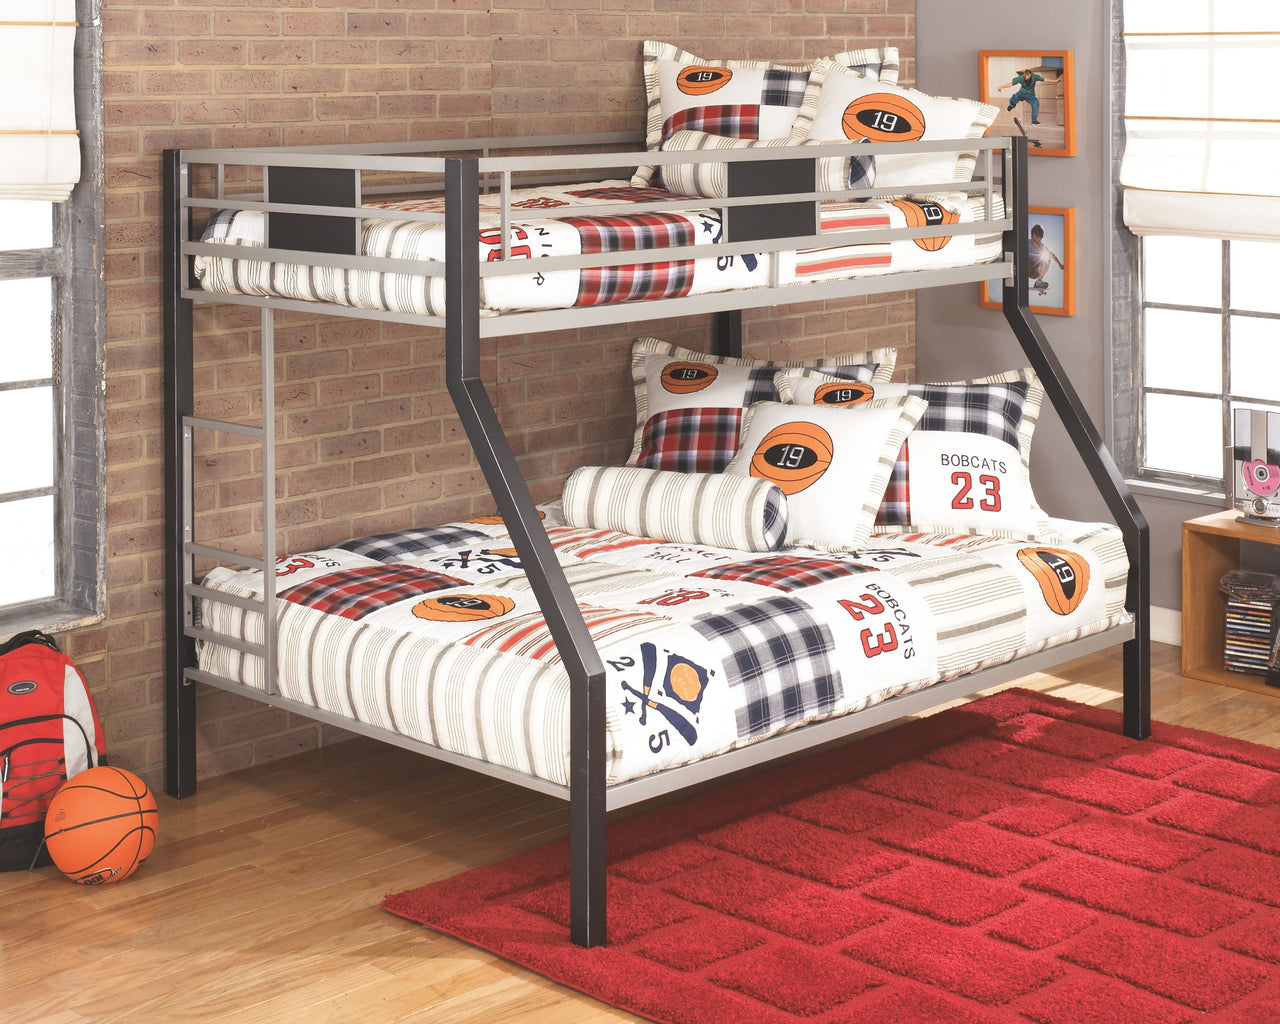 Dinsmore - Bunk Bed W/Ladder - Tony's Home Furnishings